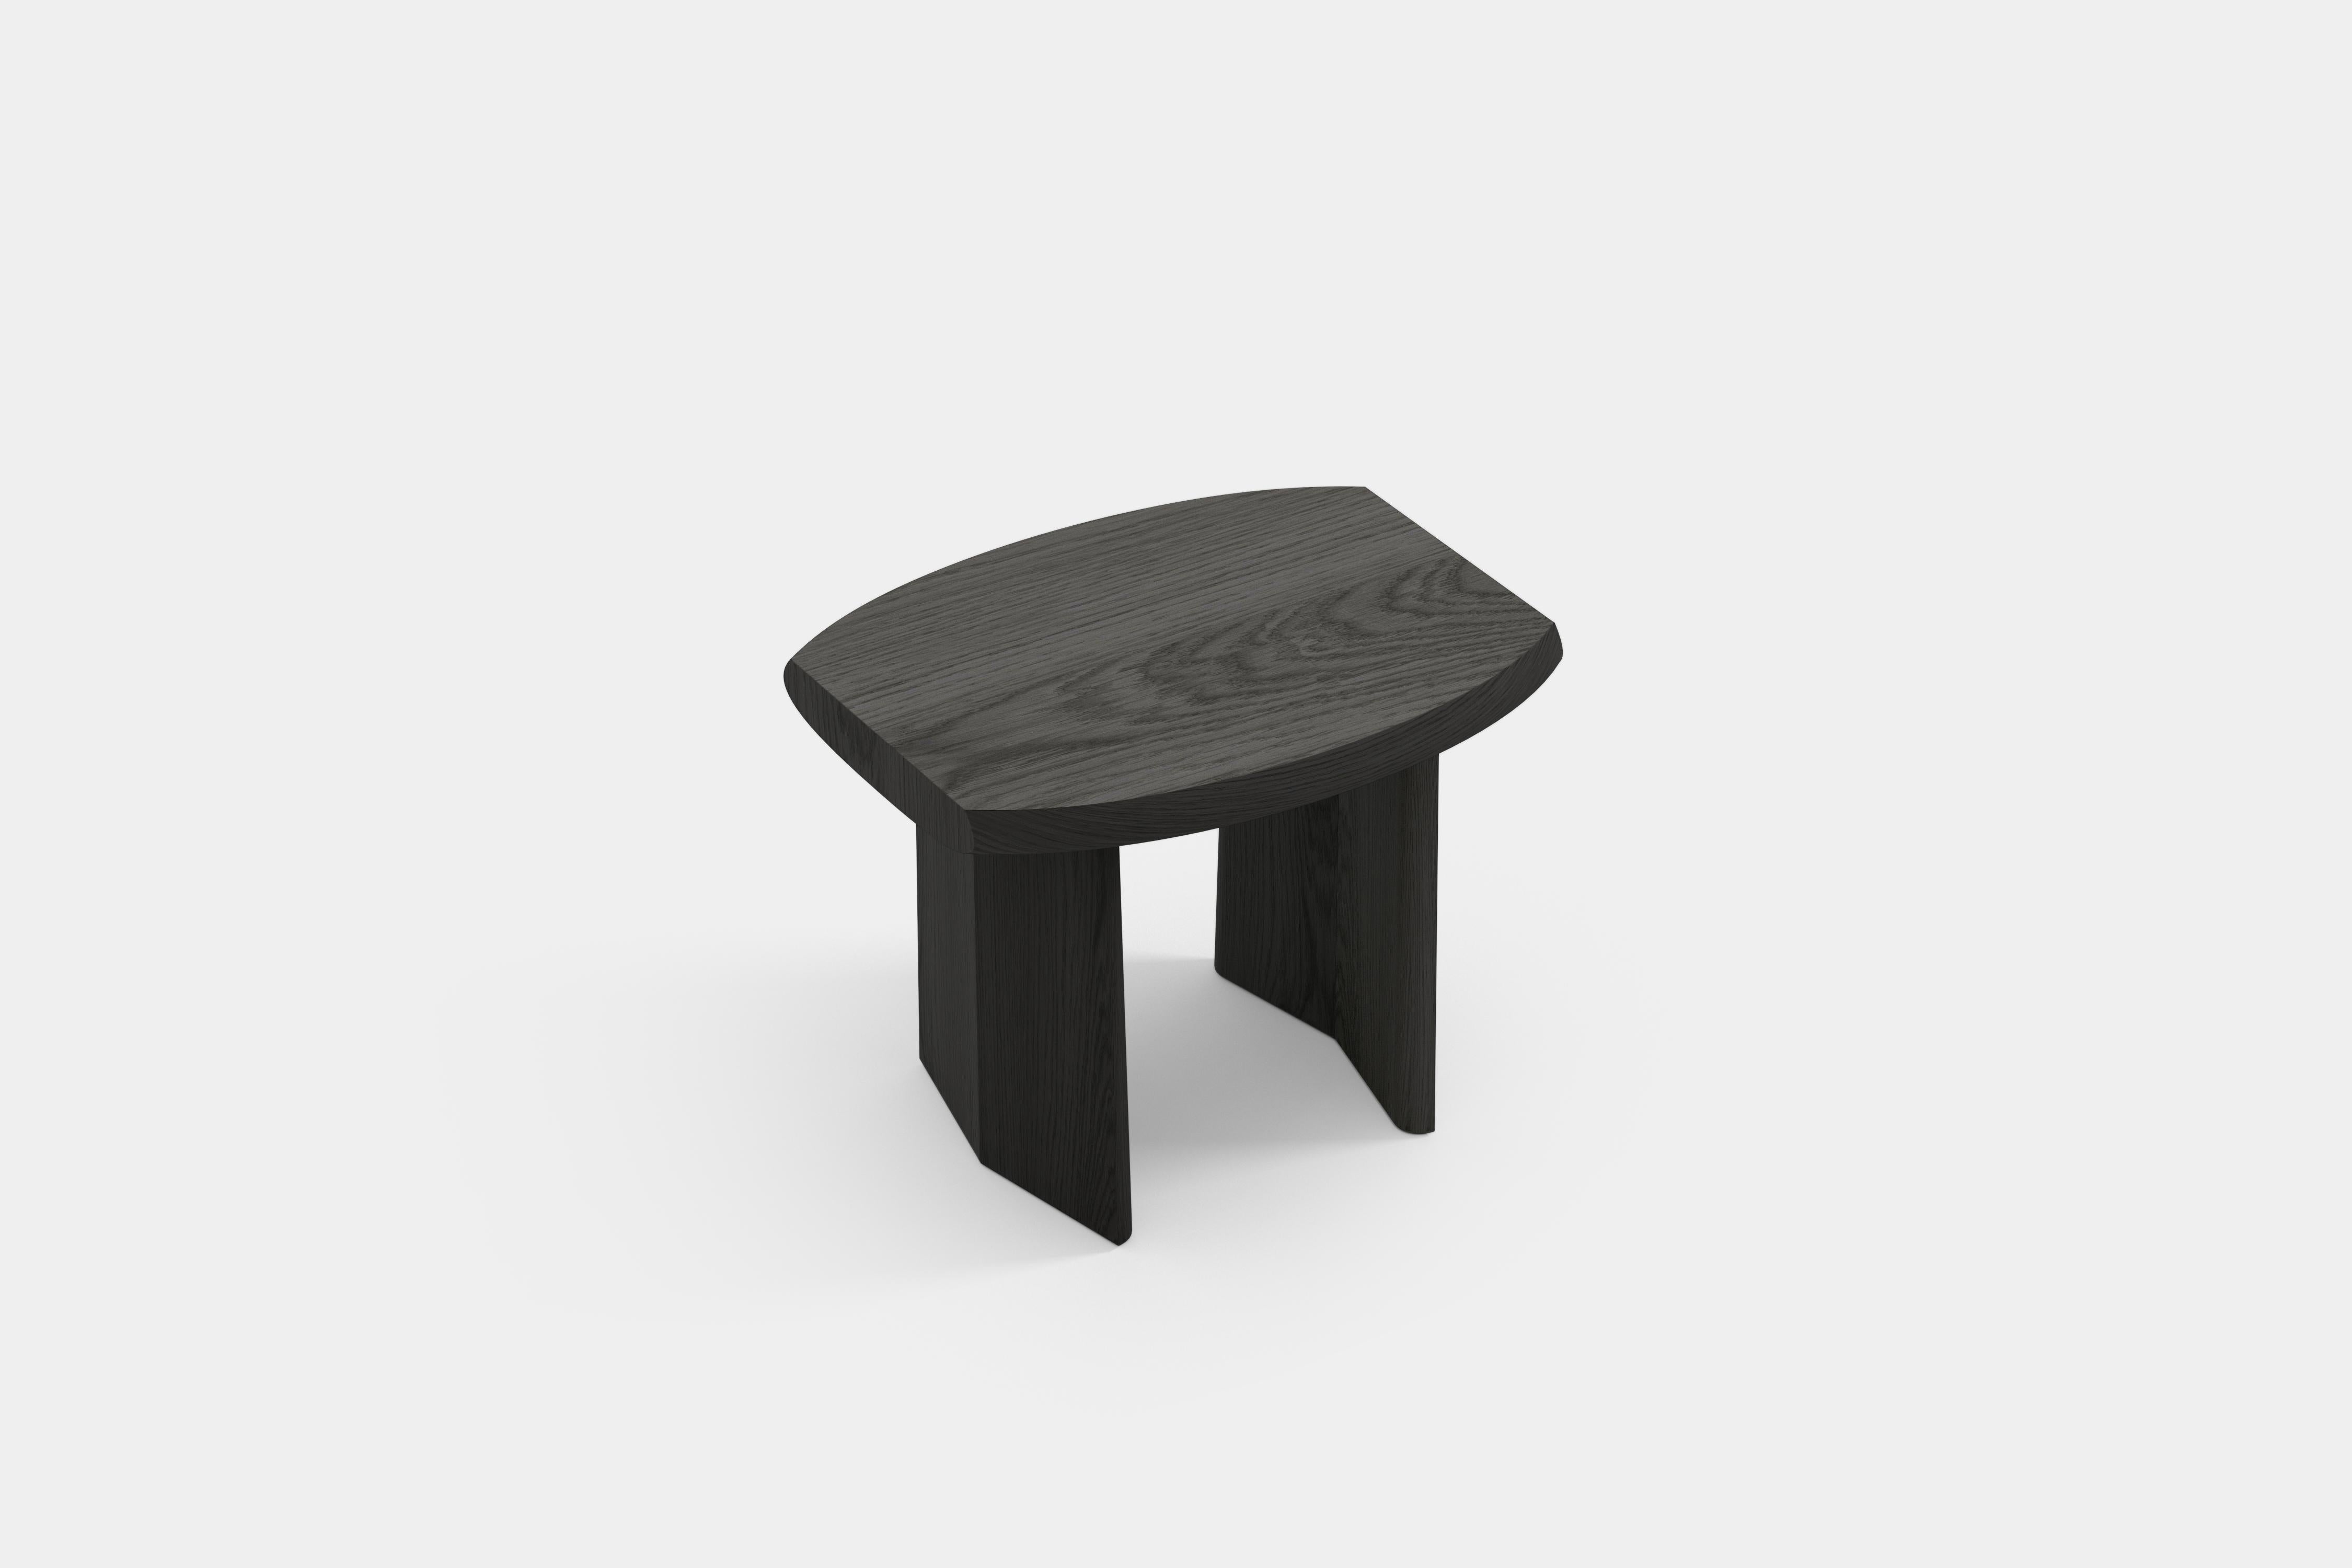 Peana Side Table, Night Stand, Table in Black Tinted Wood by Joel Escalona

Peana, which in English translates to base or pedestal, is a series of tables and different surfaces inspired by the idea of creating worthy furniture pieces to place and